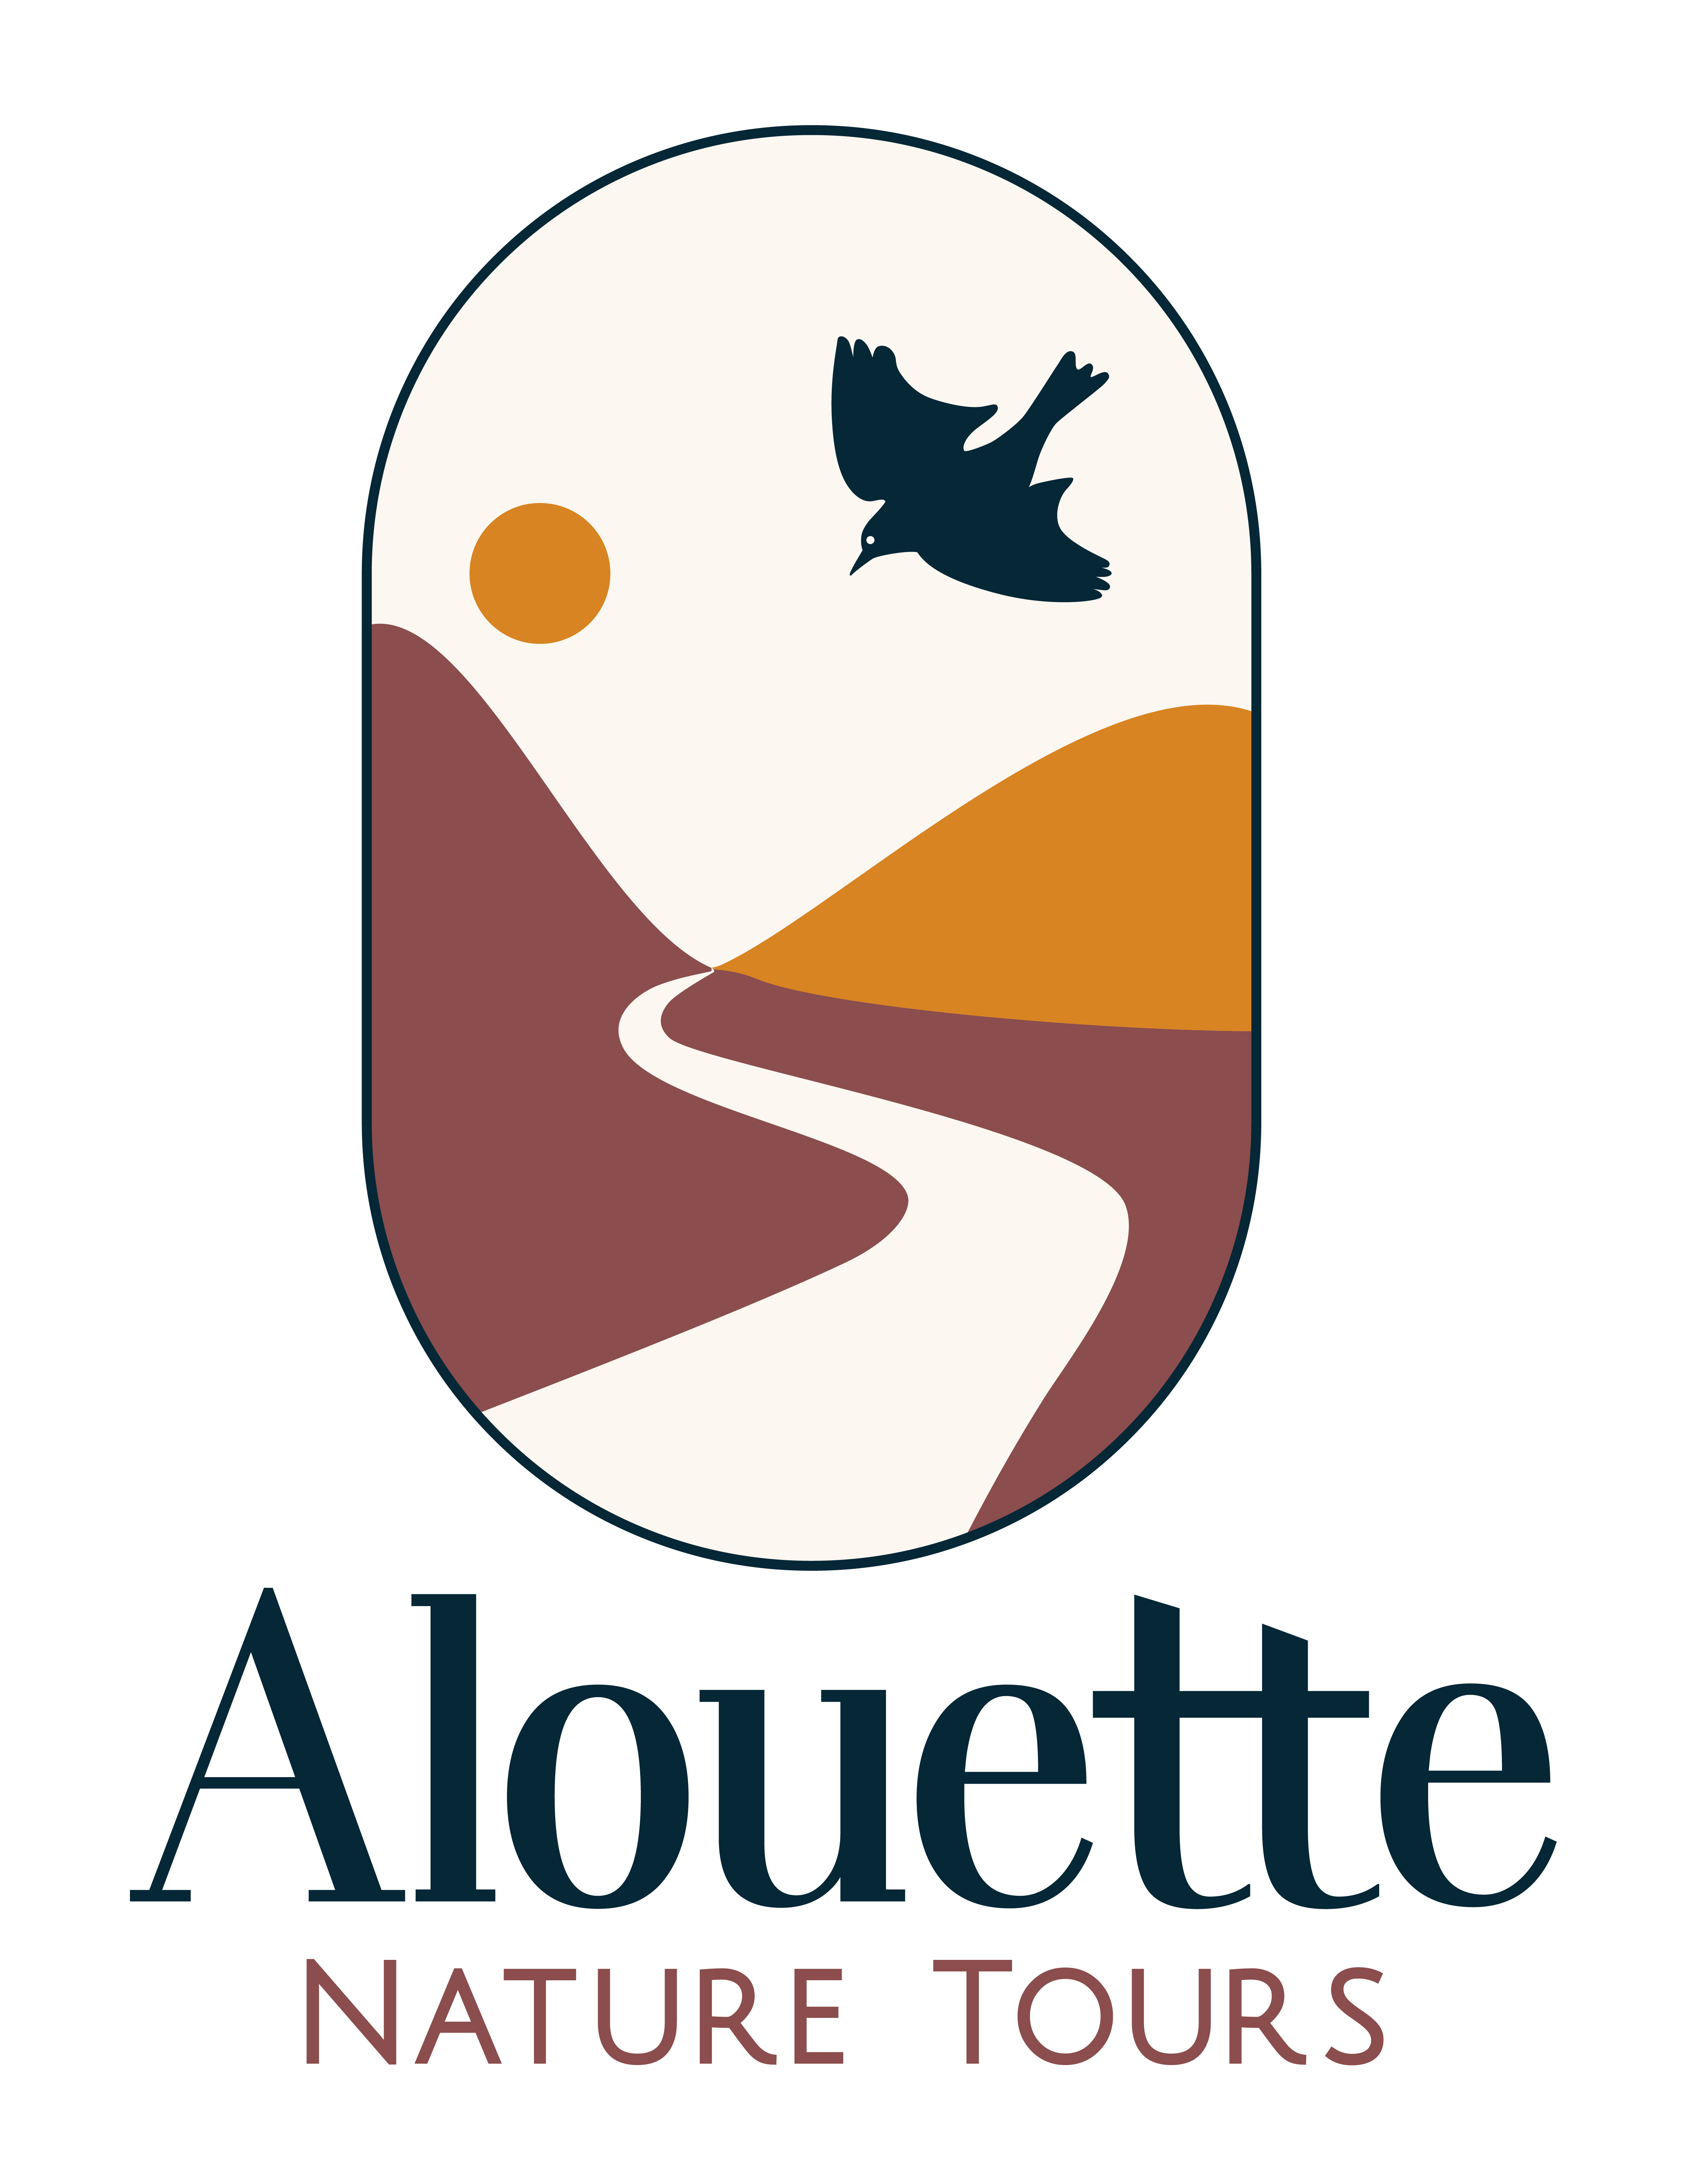 Alouette Nature tours by CatLemaire